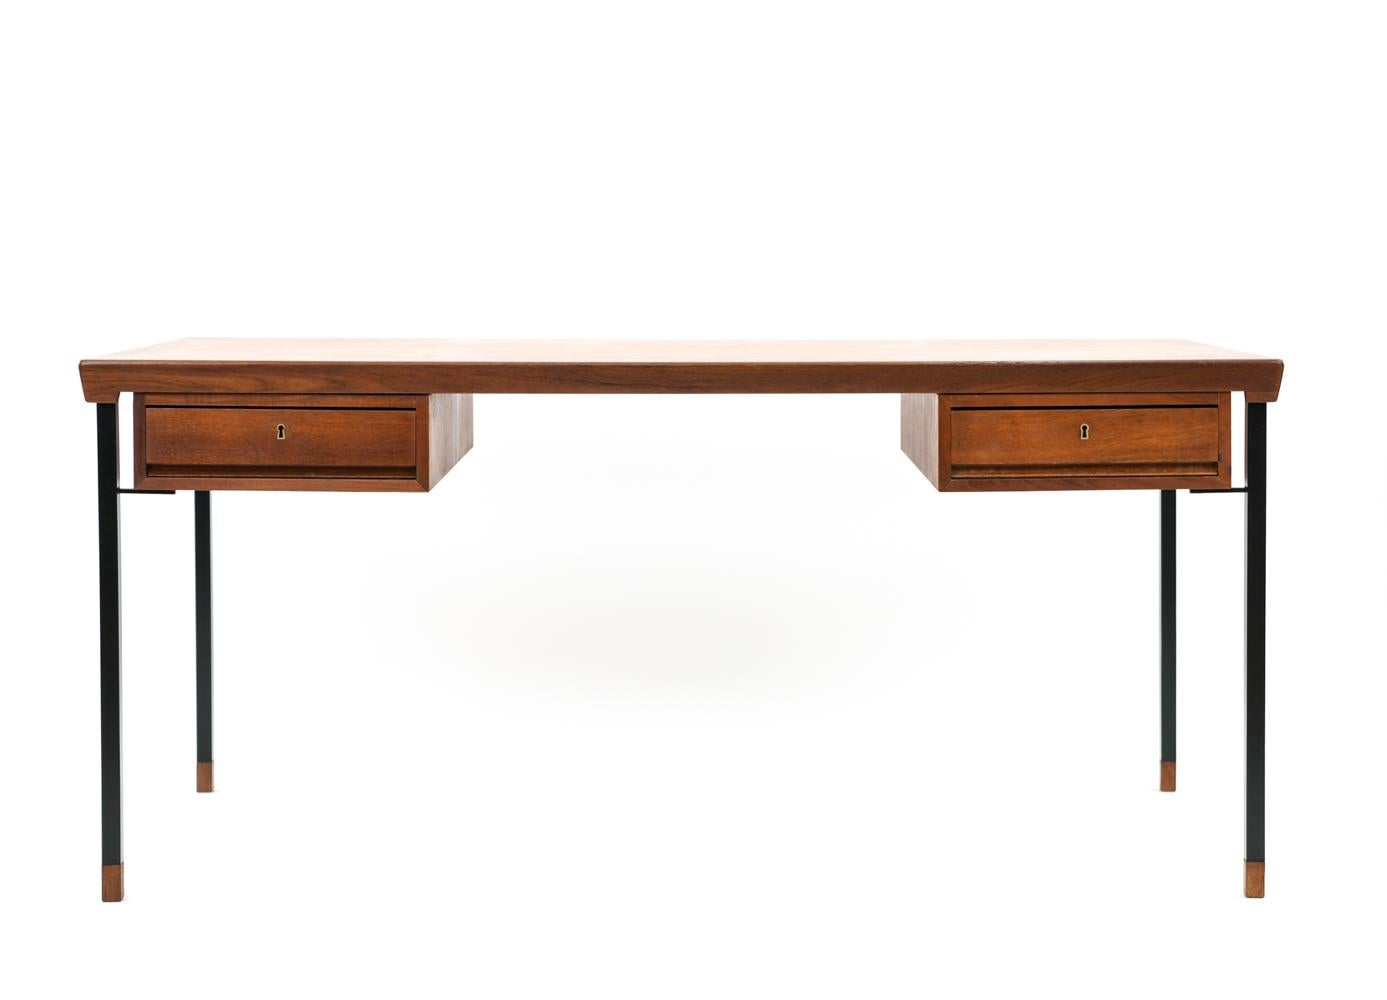 This fabulous Danish teak midcentury writing desk was the result of a collaborative design effort by Peter Hvidt and Orla Molgaard-Nielsen for Soborg Mobelfabrik, circa 1950s. Like Hvidt and Molgaard's other collaborations, this desk features steel